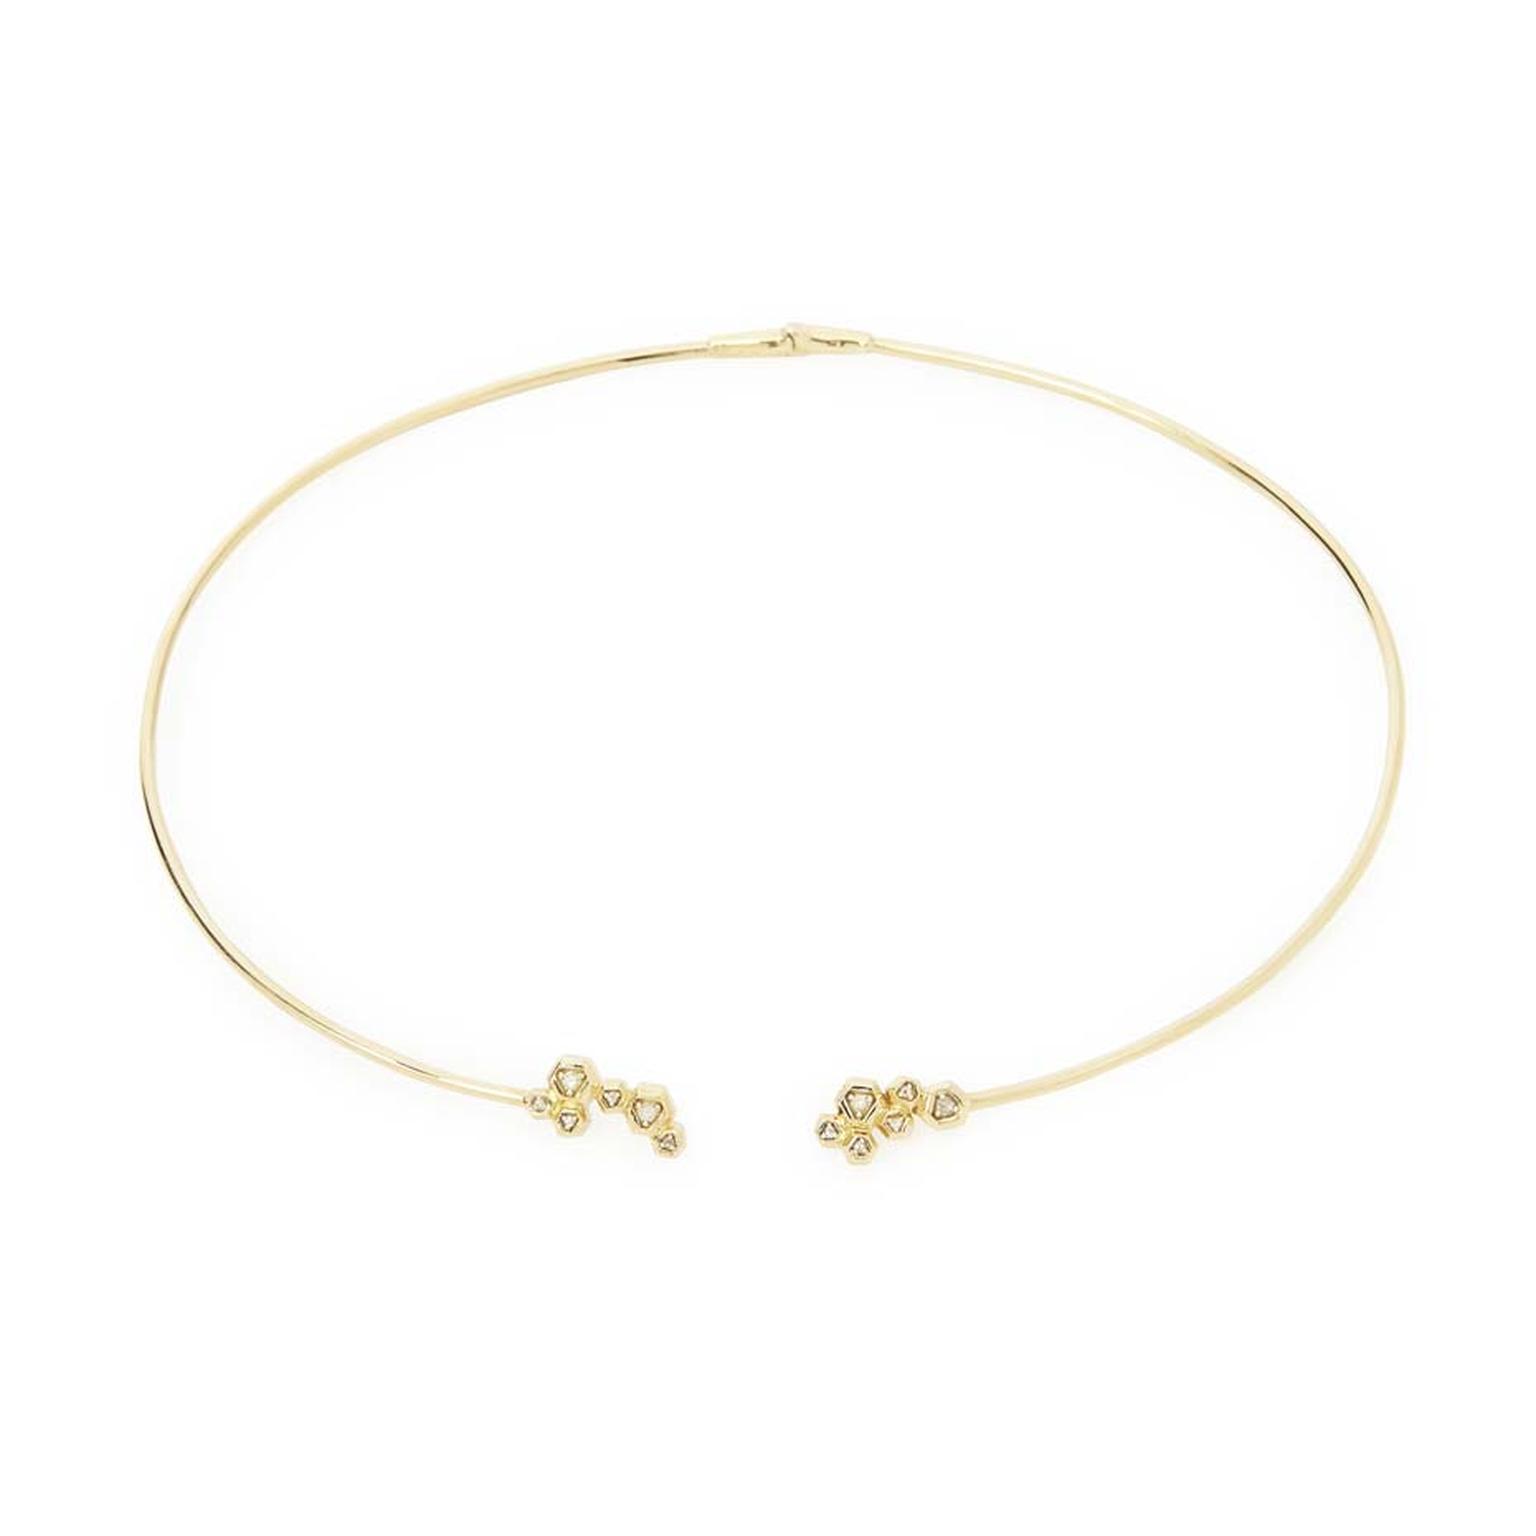 Maiyet Constellation open collar necklace in gold with diamonds ($10,500).